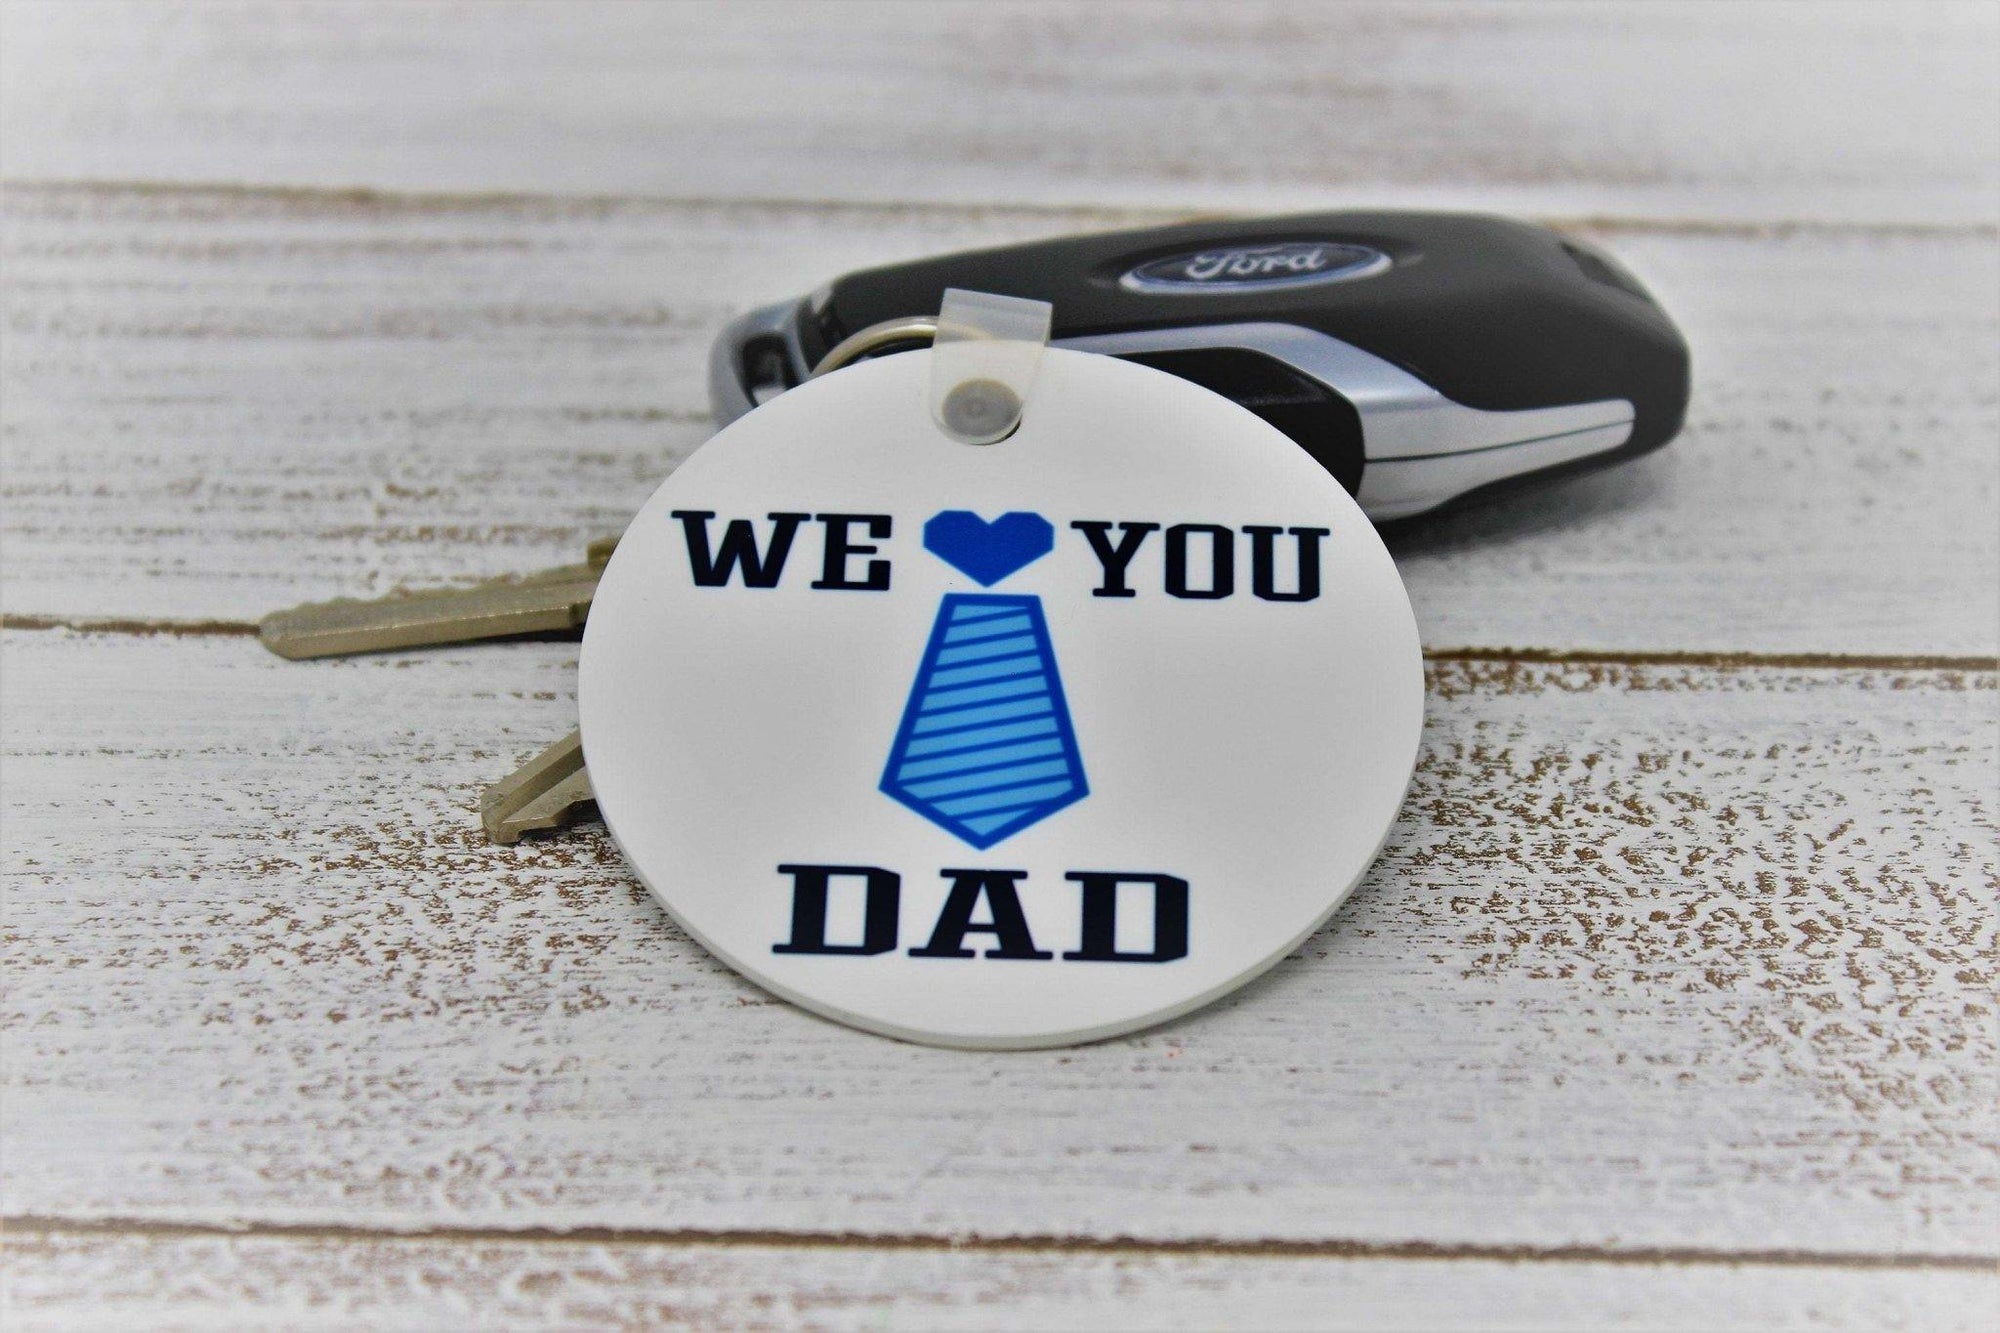 Monogrammed Key Chain | Personalized Key Chain | We love you dad - This & That Solutions - Monogrammed Key Chain | Personalized Key Chain | We love you dad - Personalized Gifts & Custom Home Decor